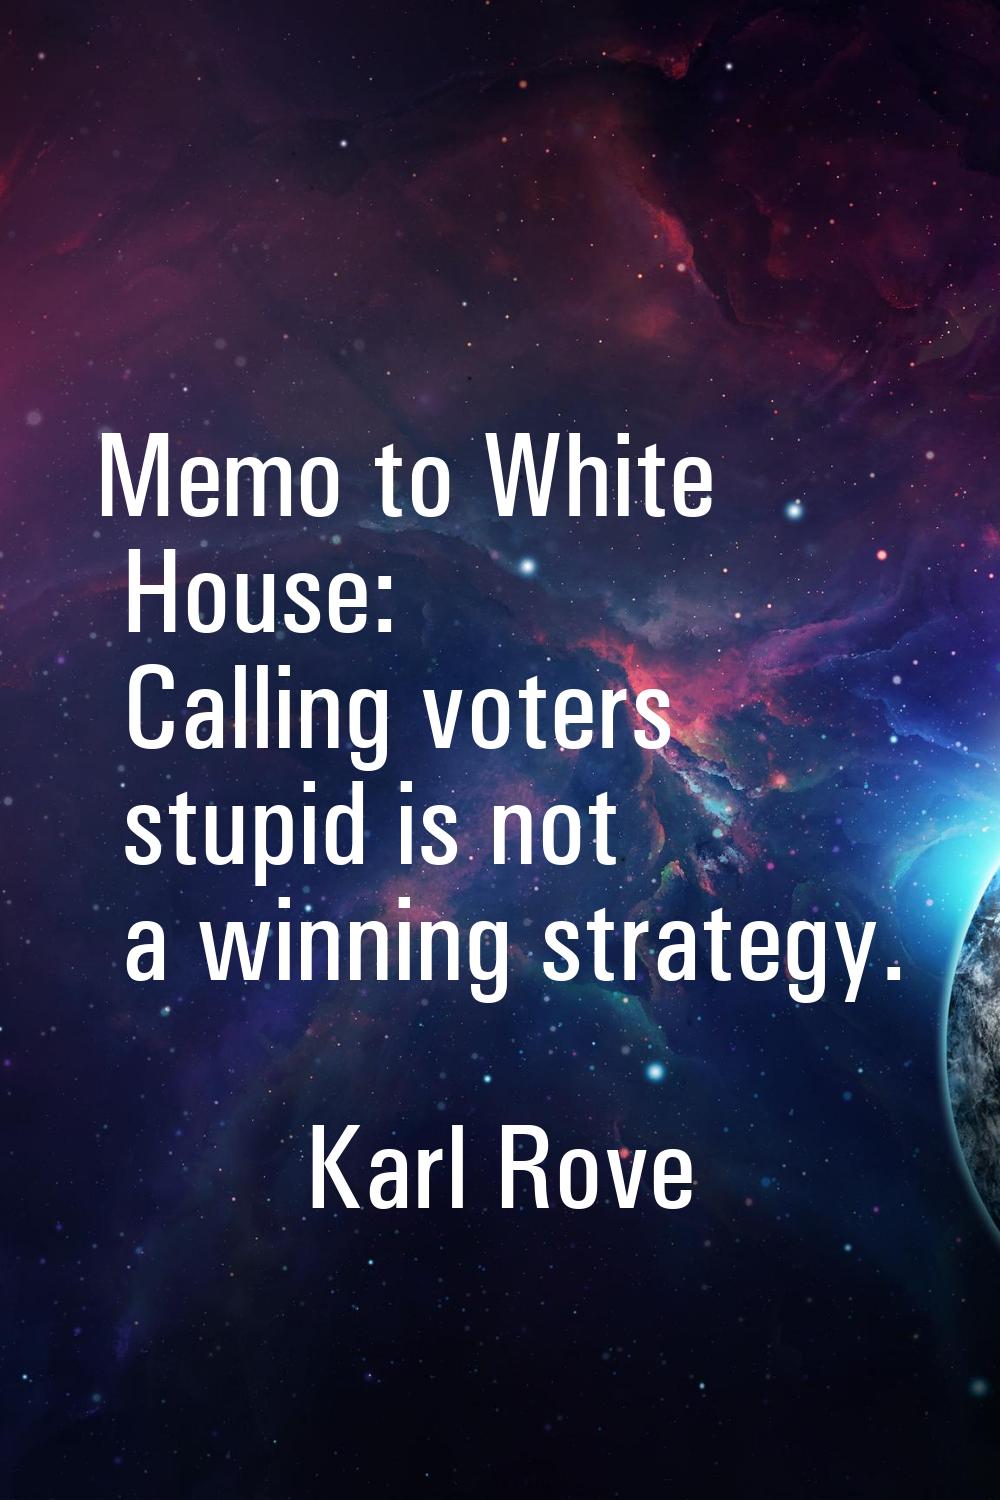 Memo to White House: Calling voters stupid is not a winning strategy.